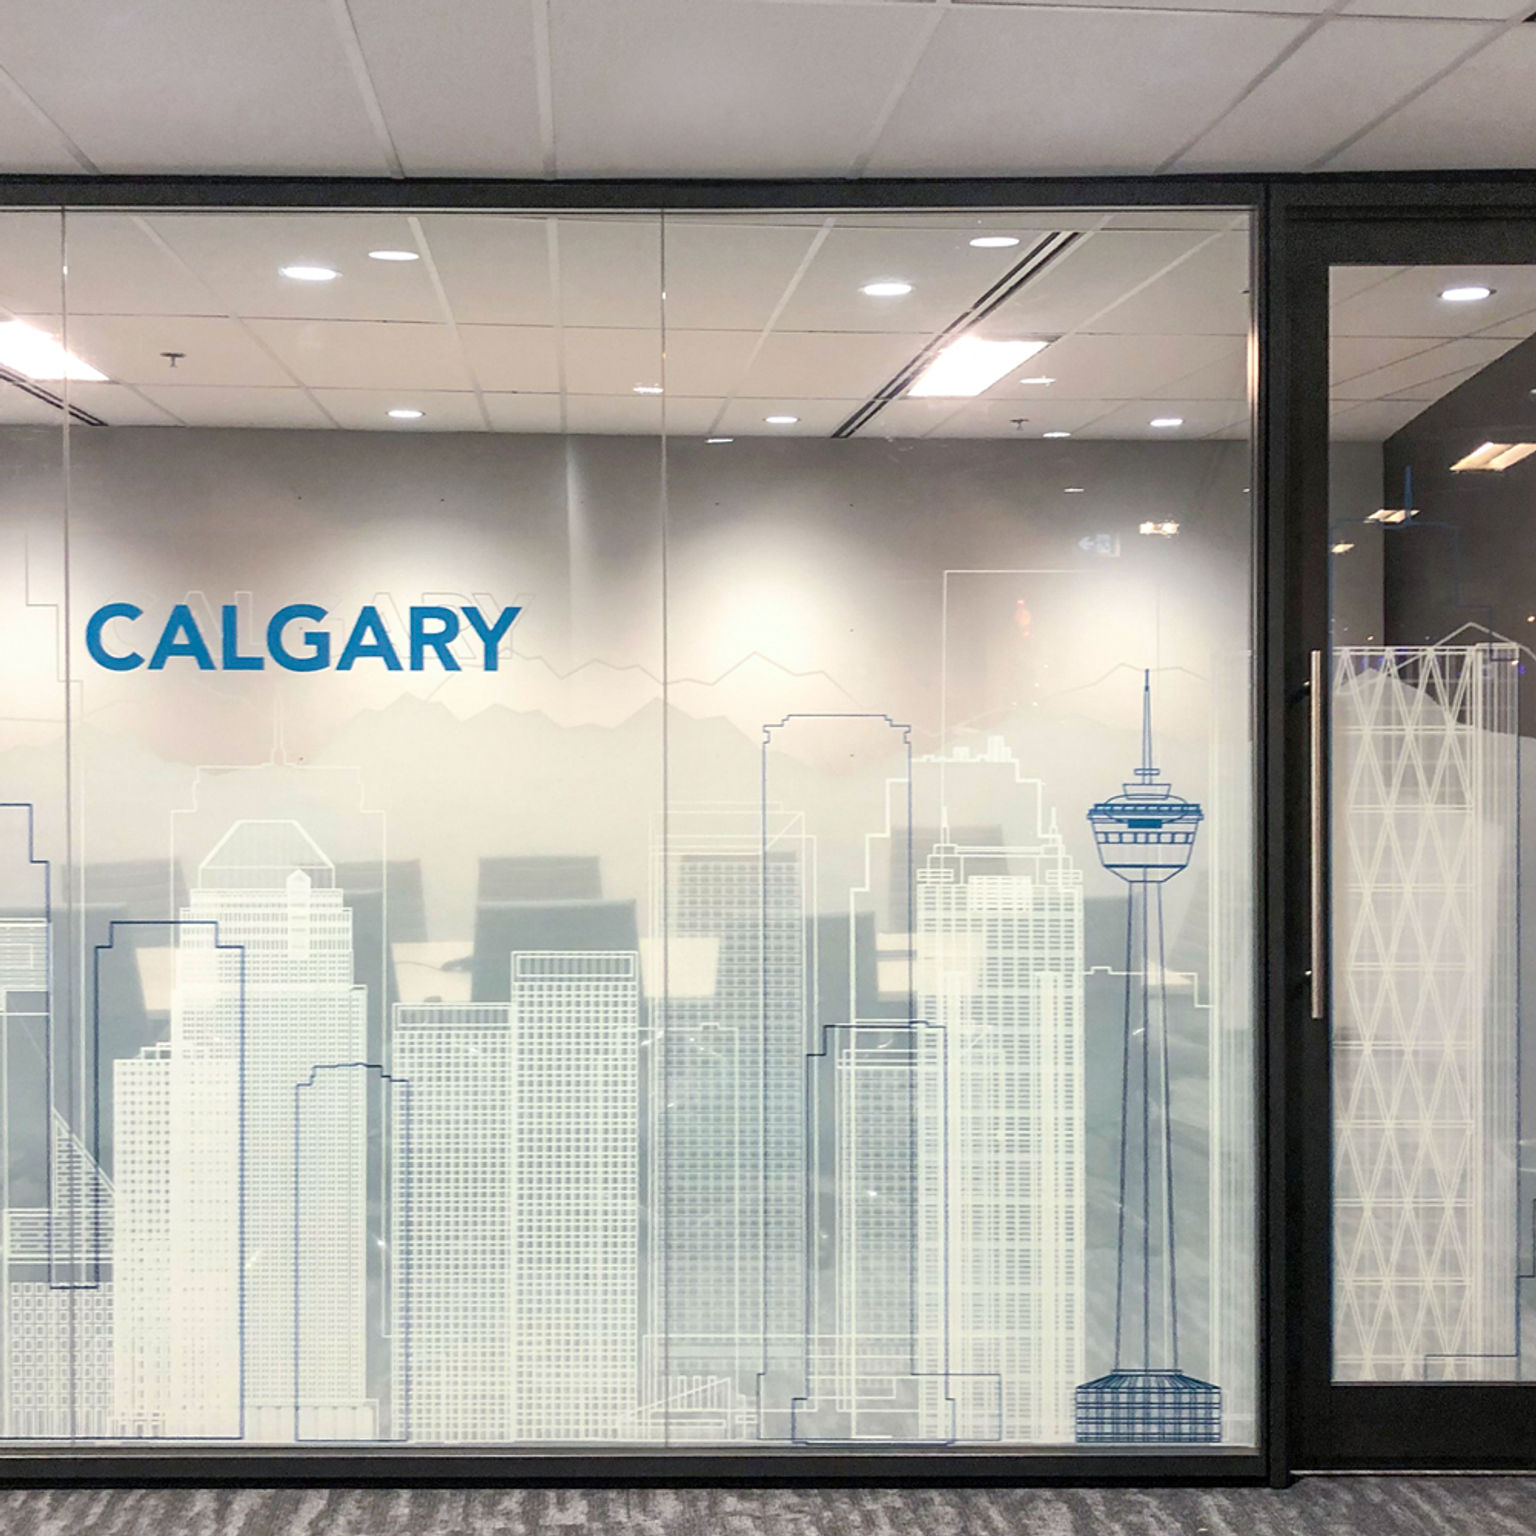 Privacy window film with the Calgary city skyline graphics spans a conference room's glass walls and doors.